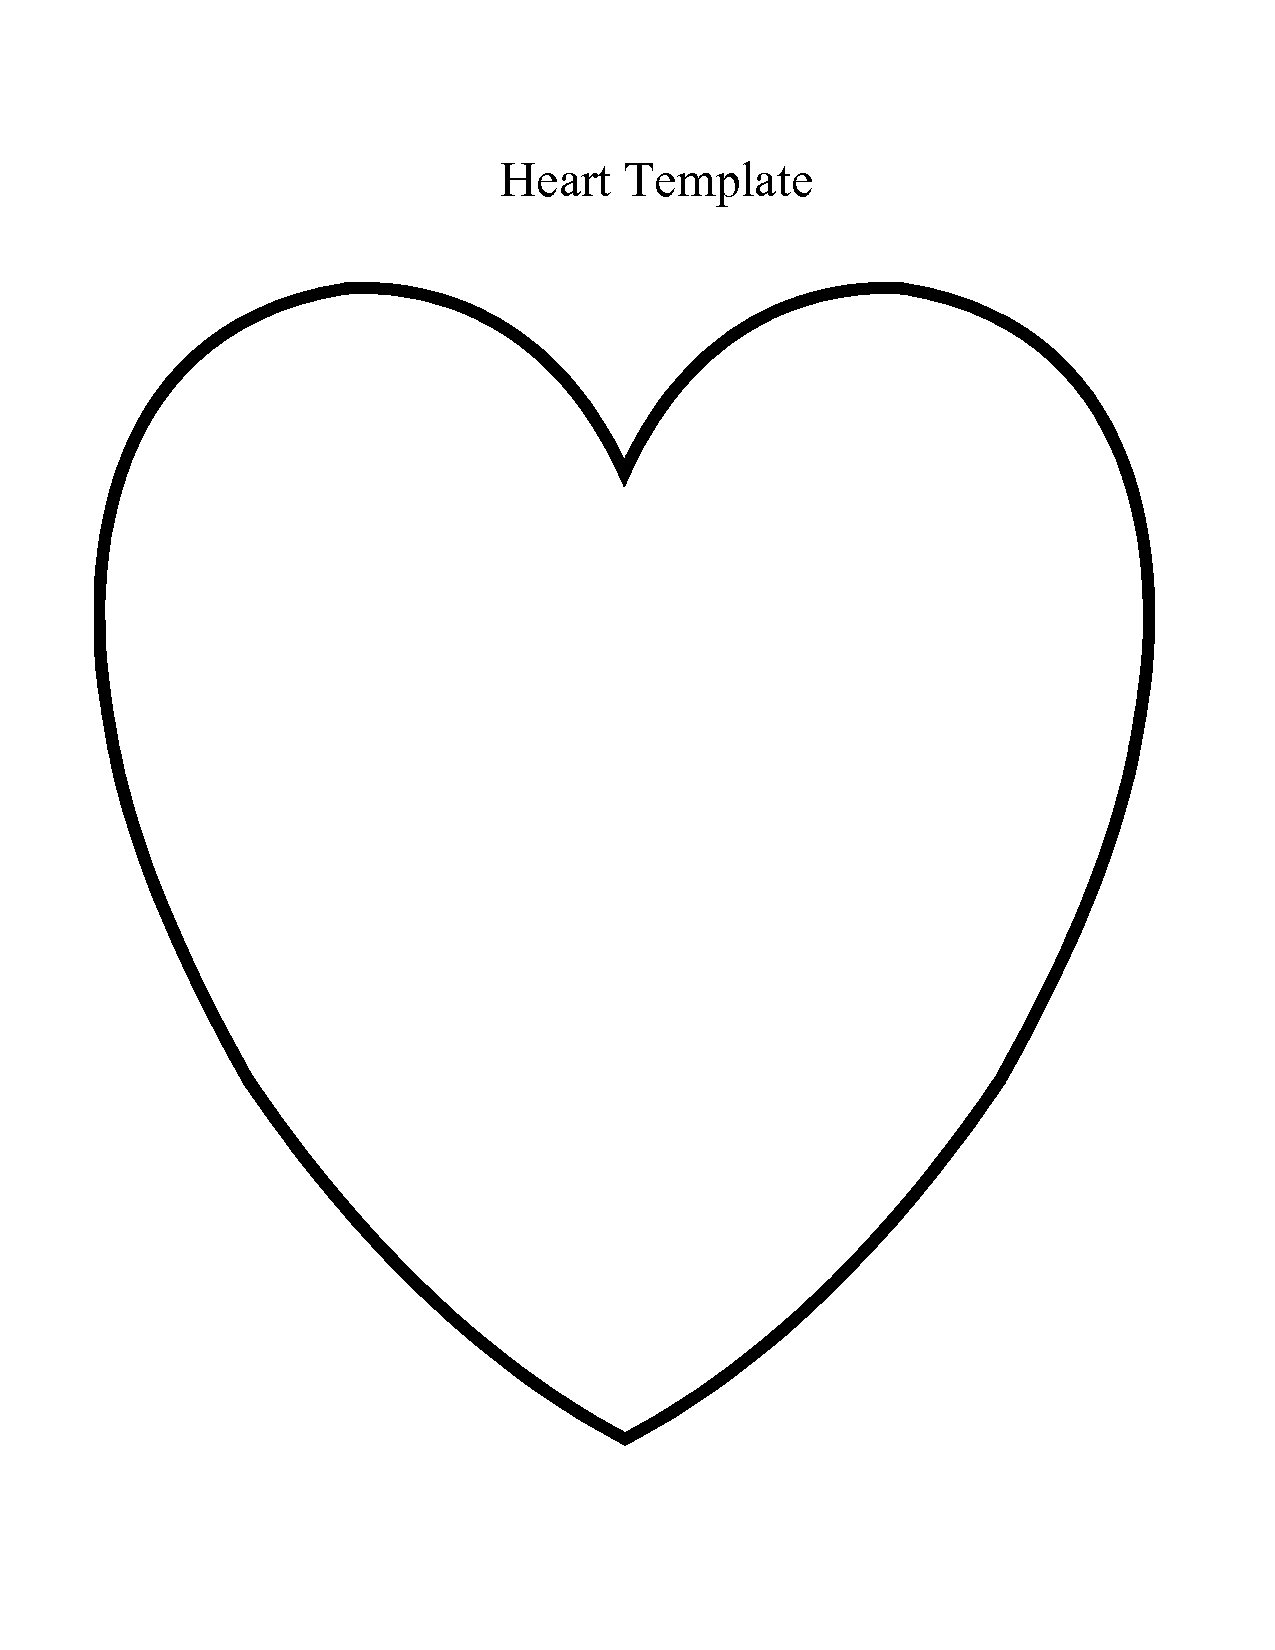 9 Best Images of Free Printable Heart Template Large - Love Heart ...